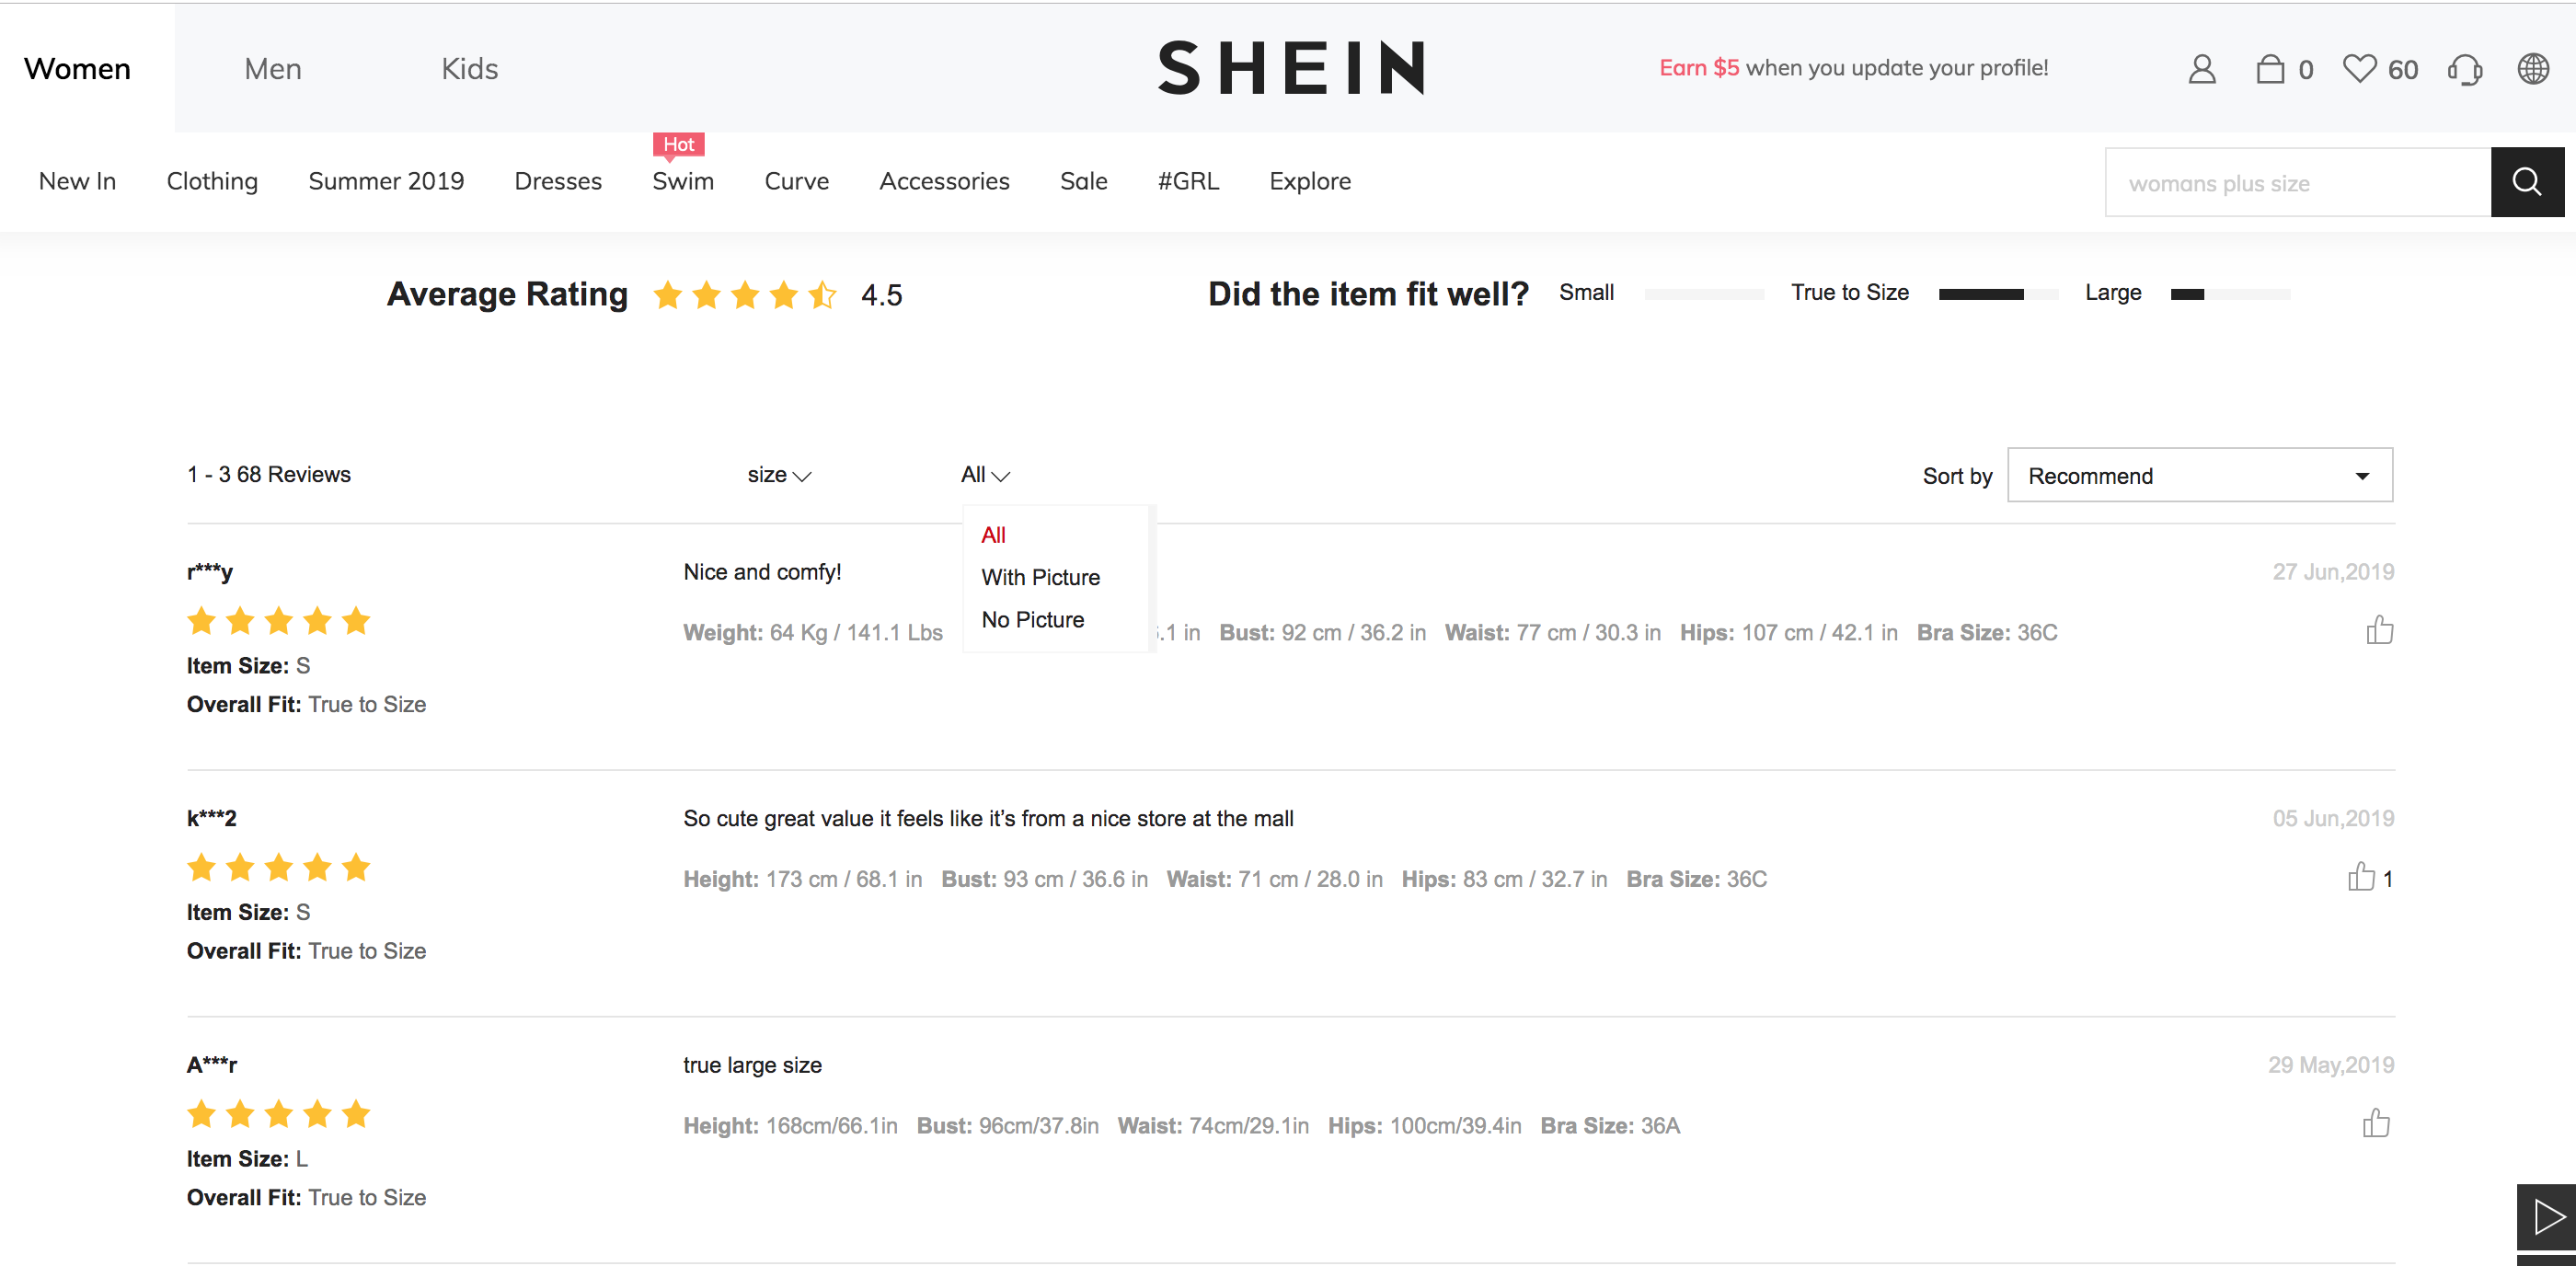 How To Write A Review On Shein